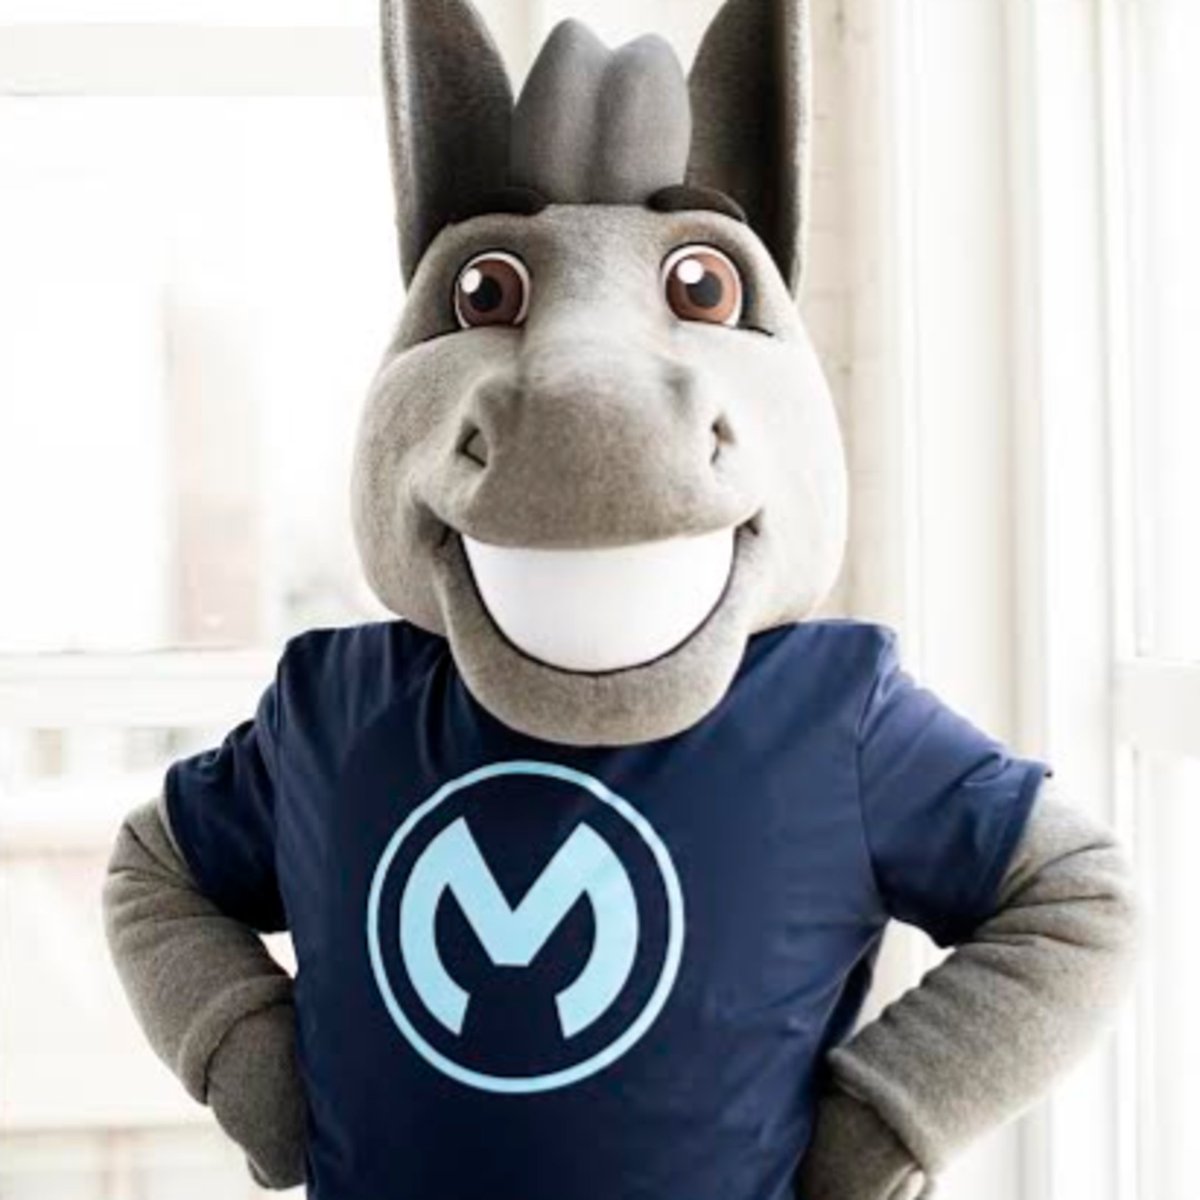 This little fellow was very, very good to me today. #mulesoft